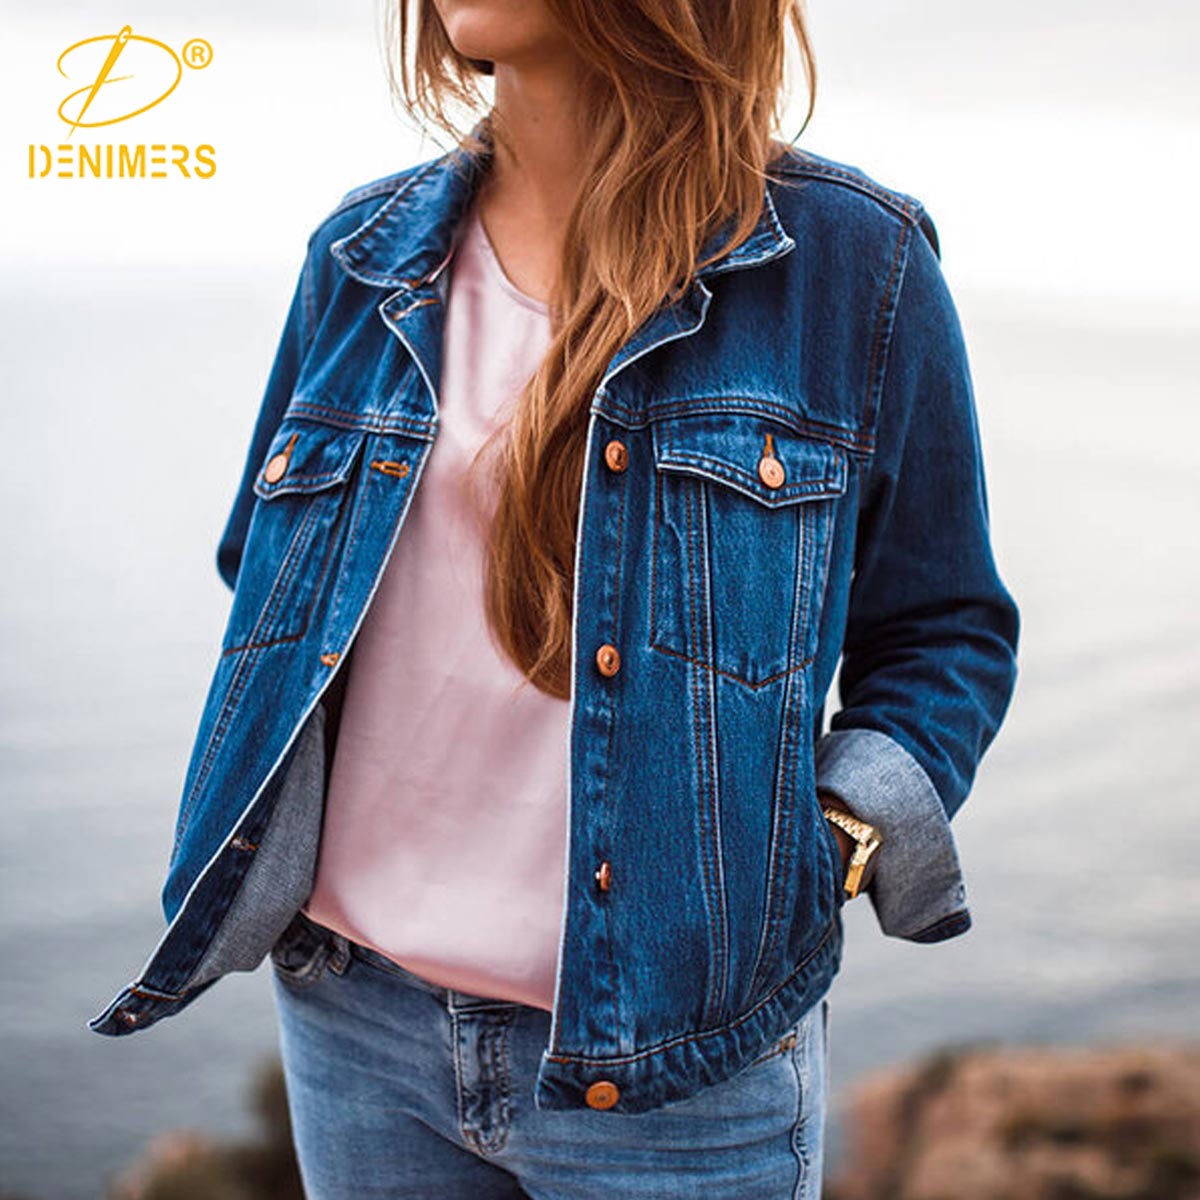 Denim Jackets: A Must Add Clothing To Your Wardrobe